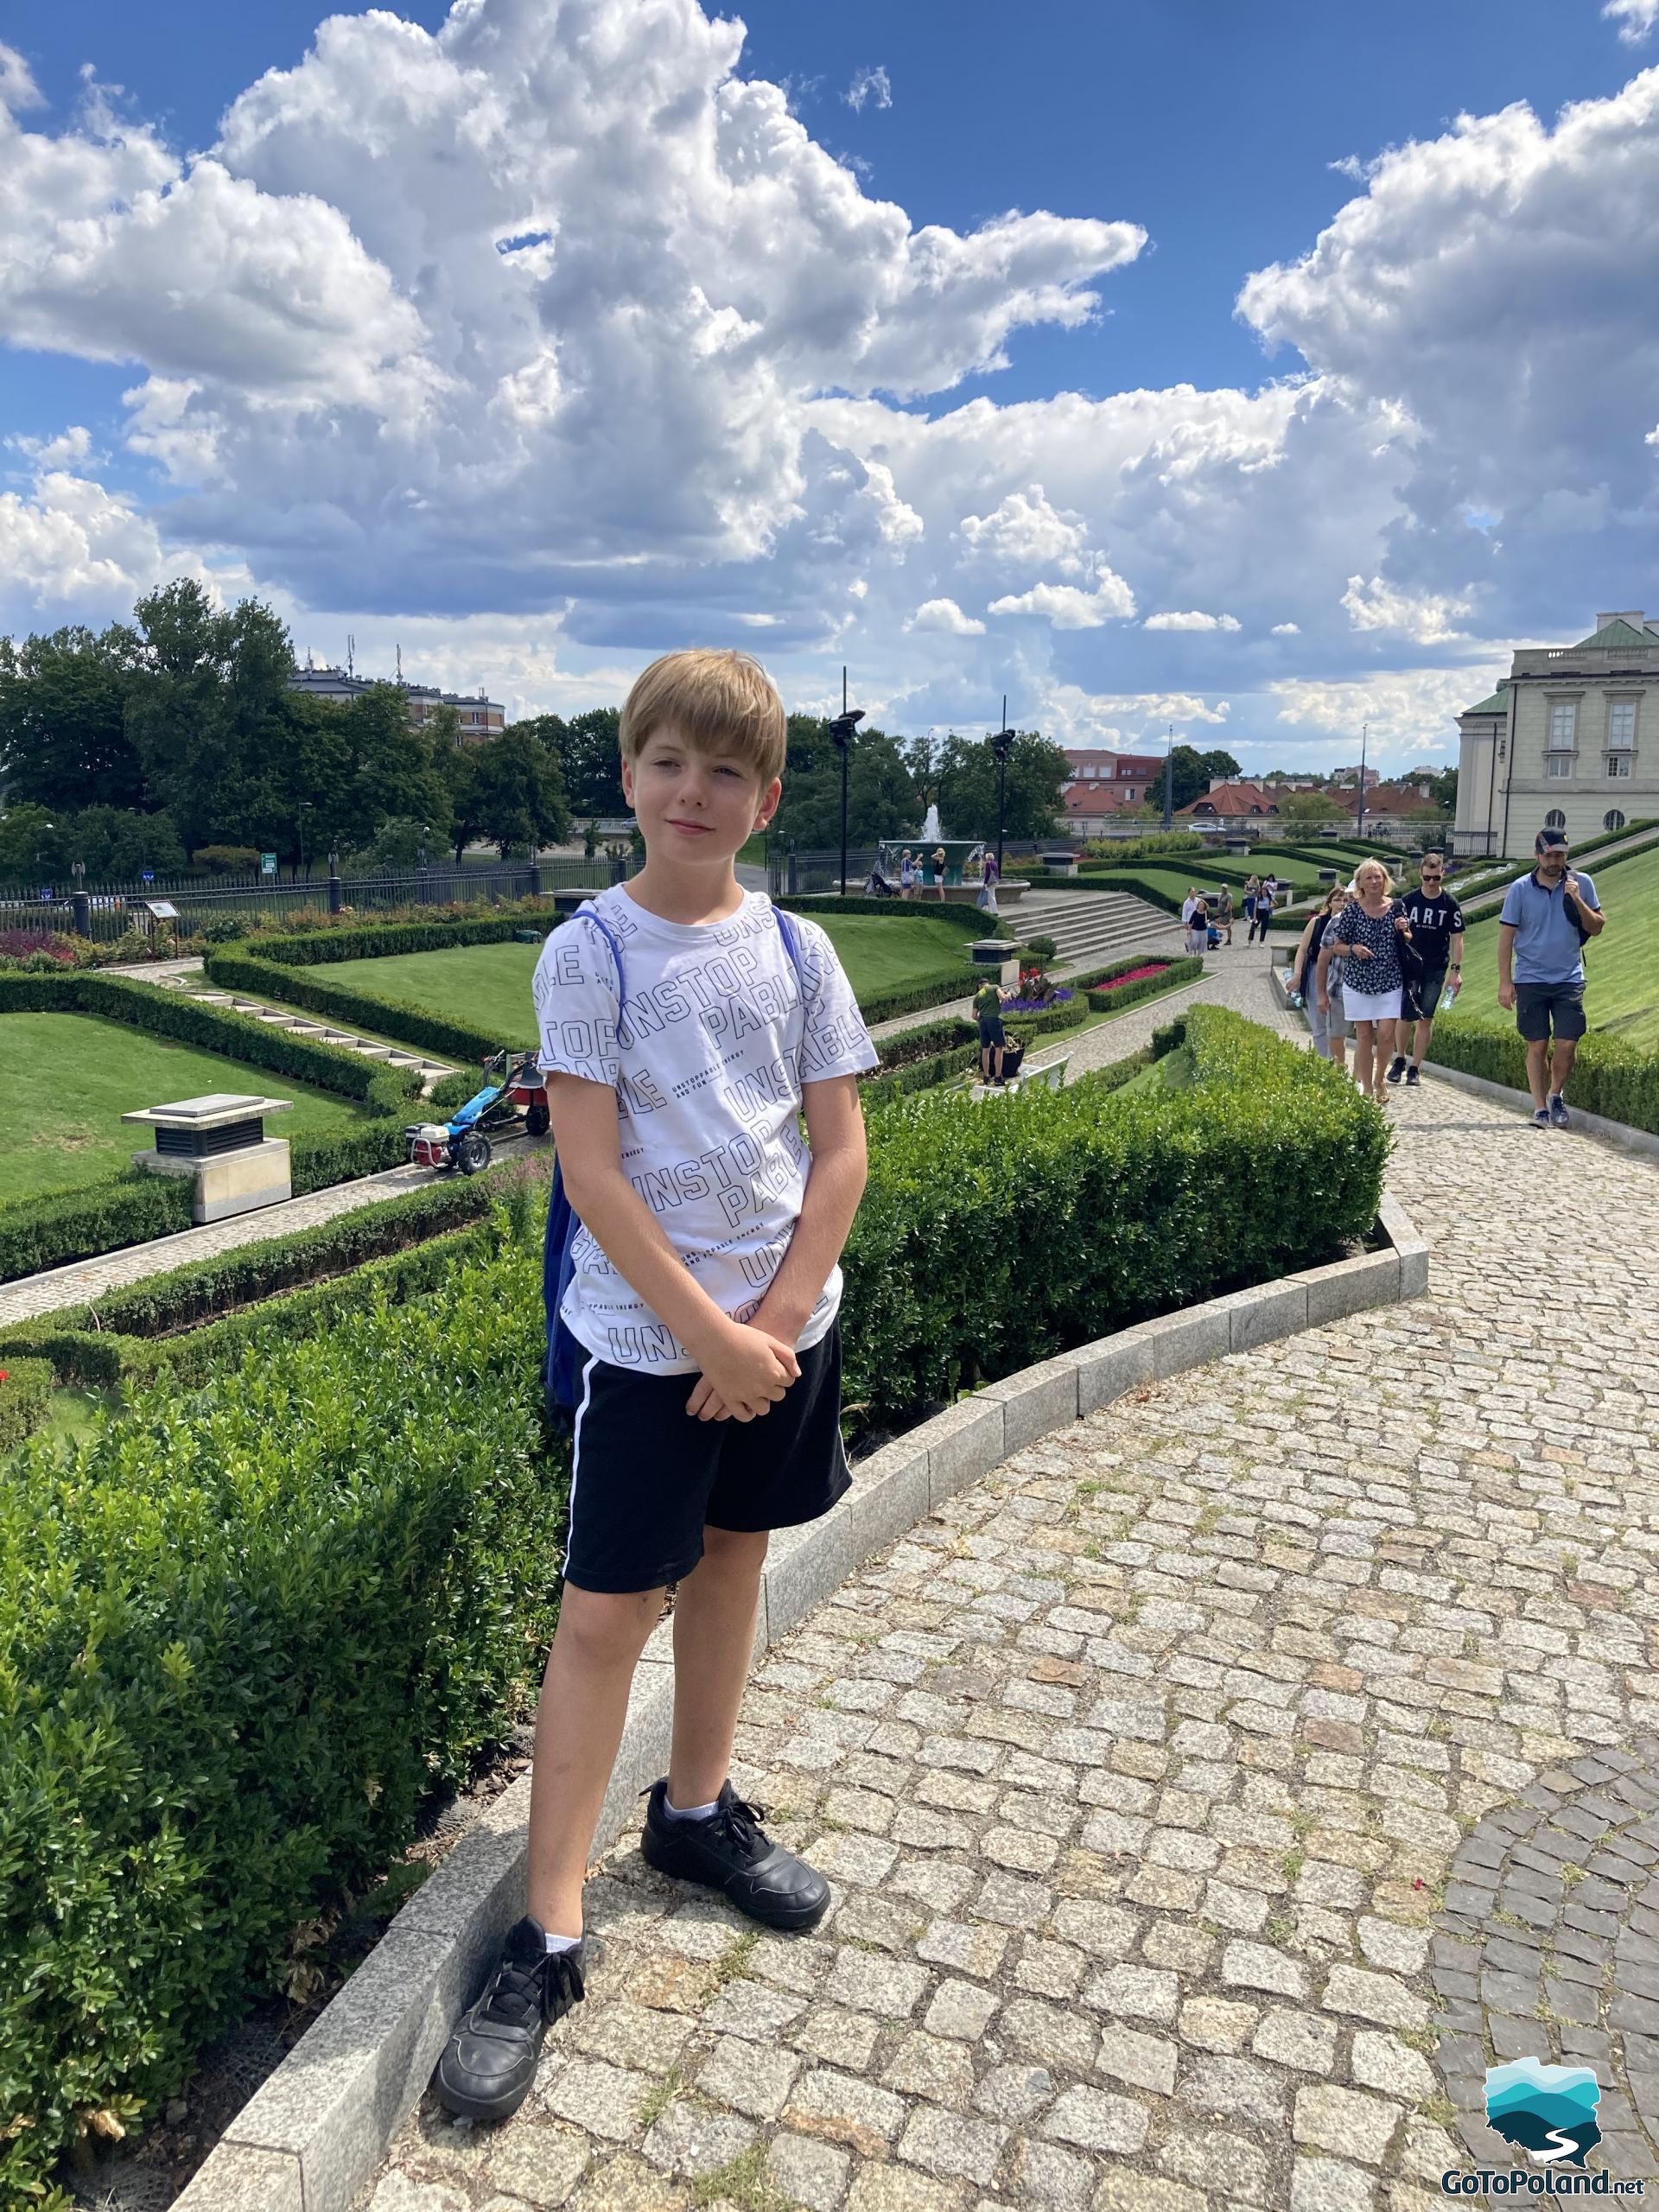 a boy in a white t-shirt and black shorts stands on a path made of cobblestones, the royal gardens stretch behind him